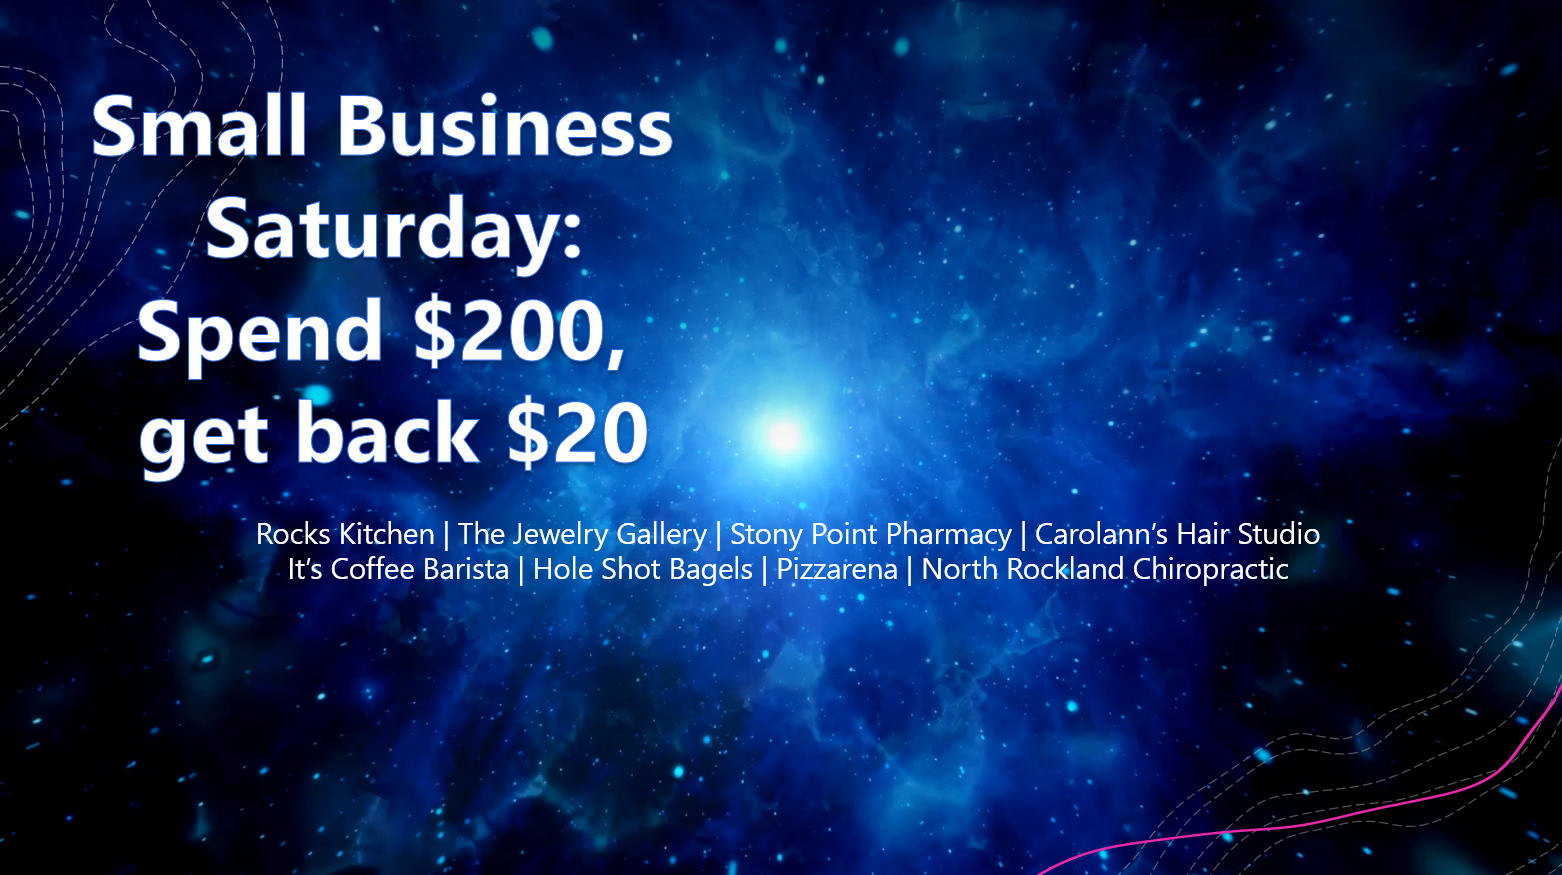 Small Business Saturday – $20 Back!